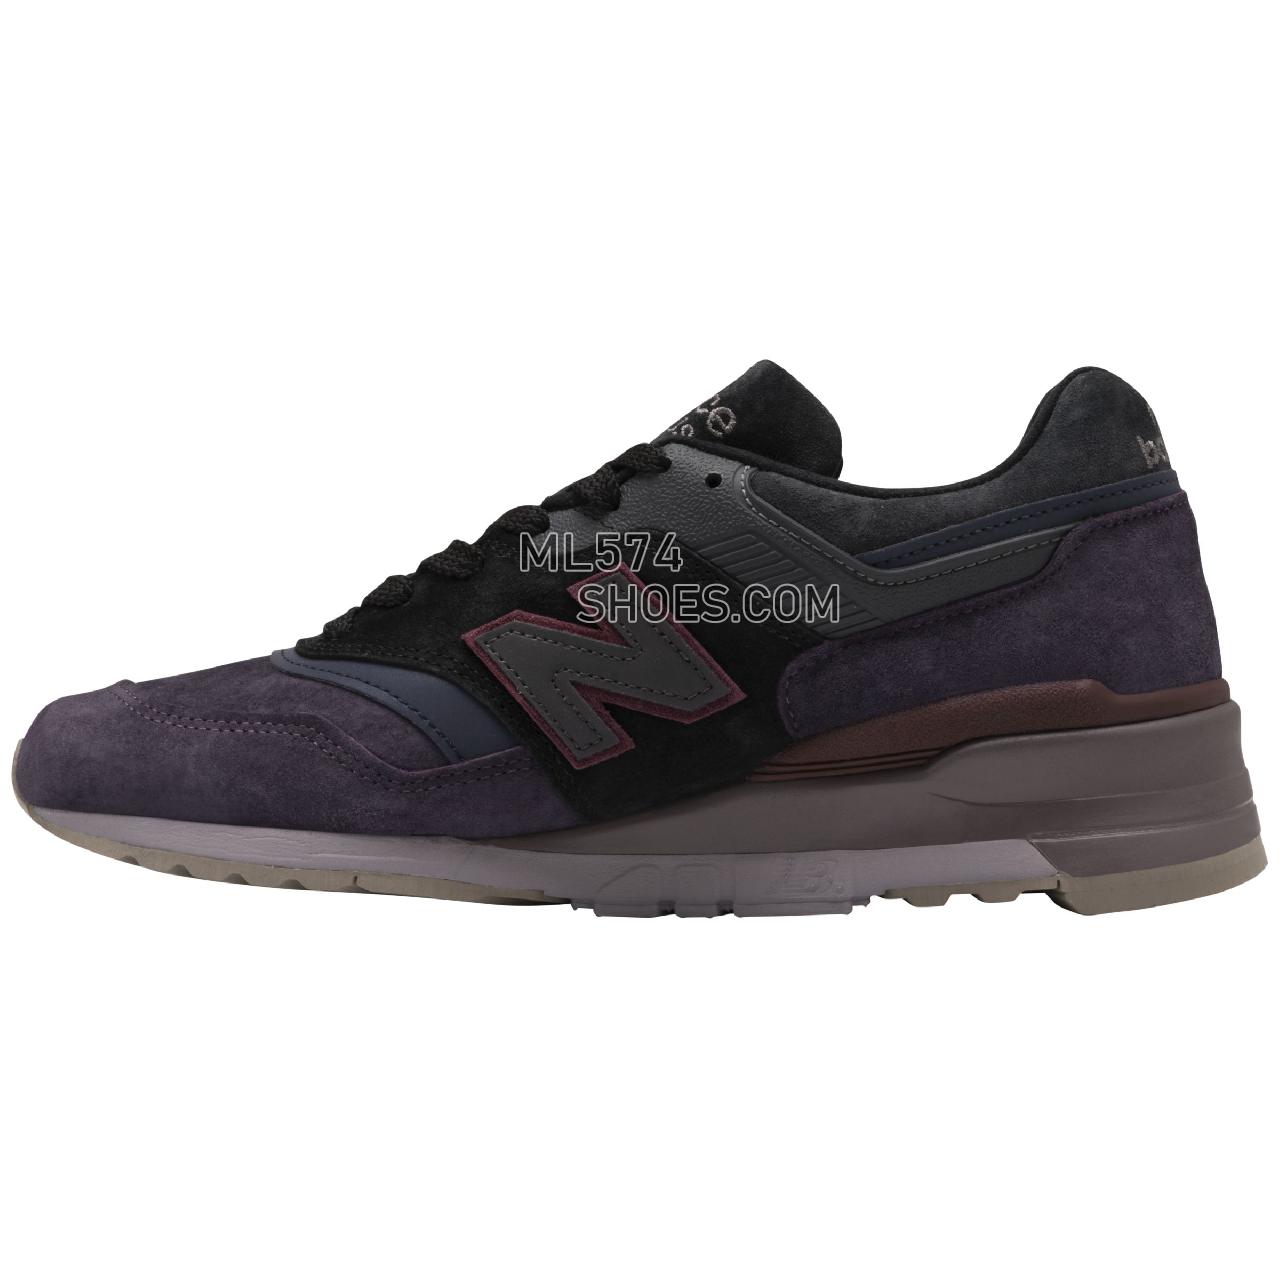 New Balance Made in US 997 - Men's Made in US 997 Classic - Black with Pigment - M997NAK